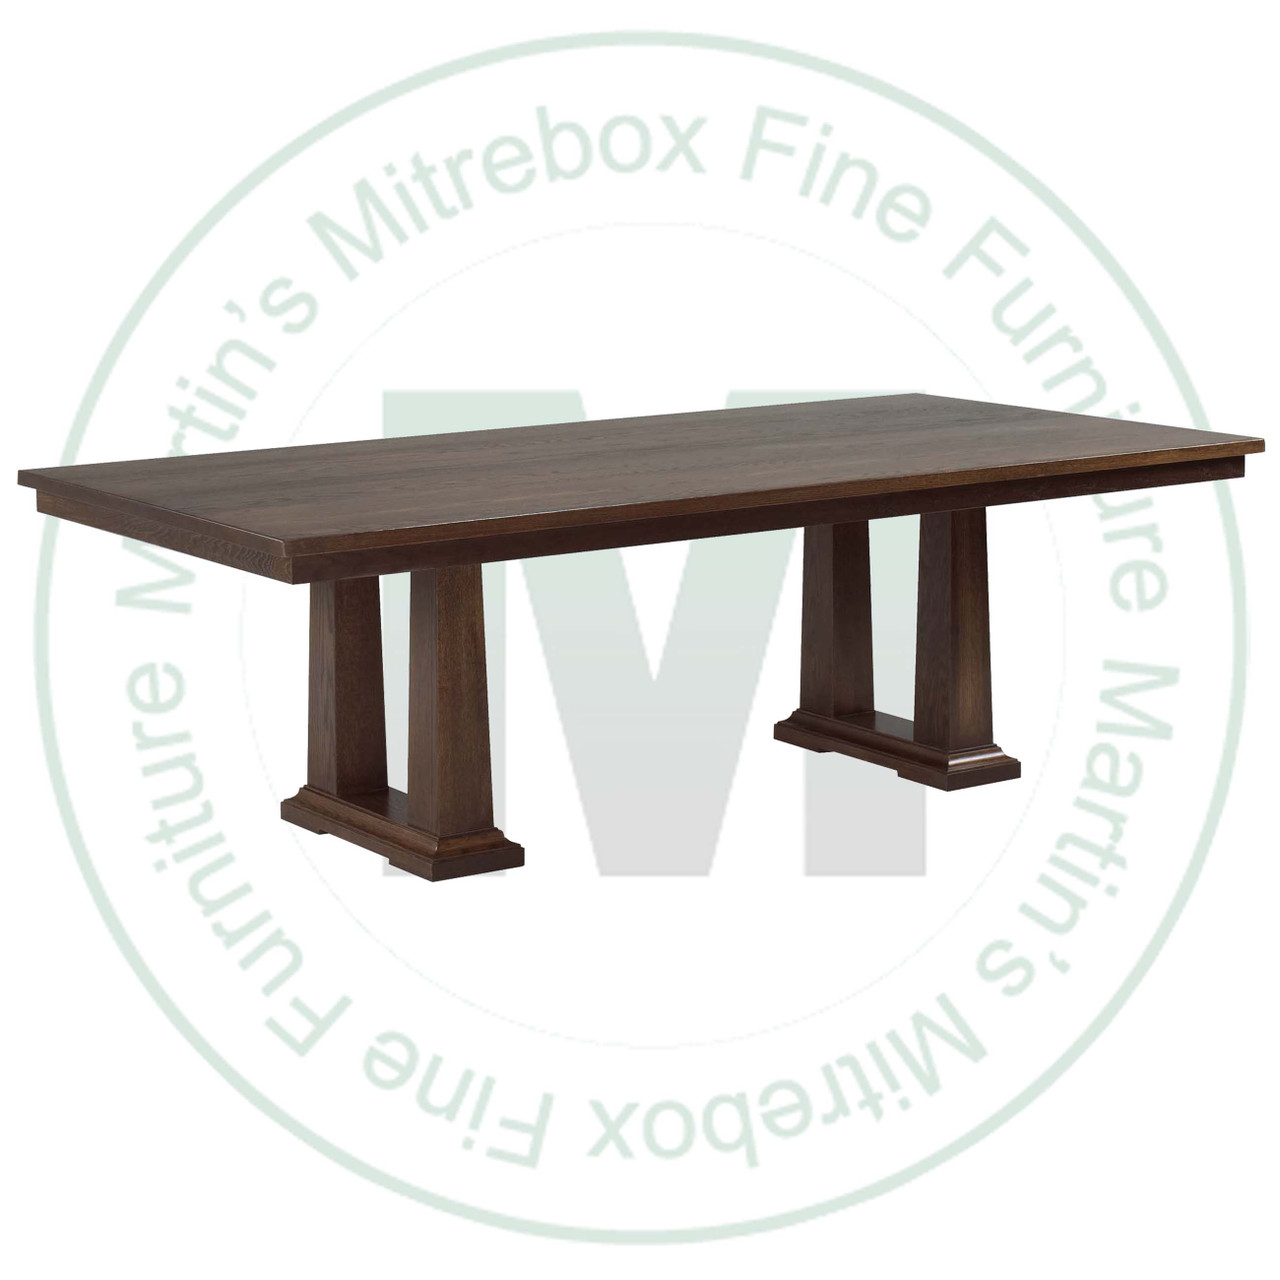 Oak Acropolis Extension Double Pedestal Table 42''D x 84''W x 30''H With 4 - 12'' Leaves Table Has 1.75'' Thick Top